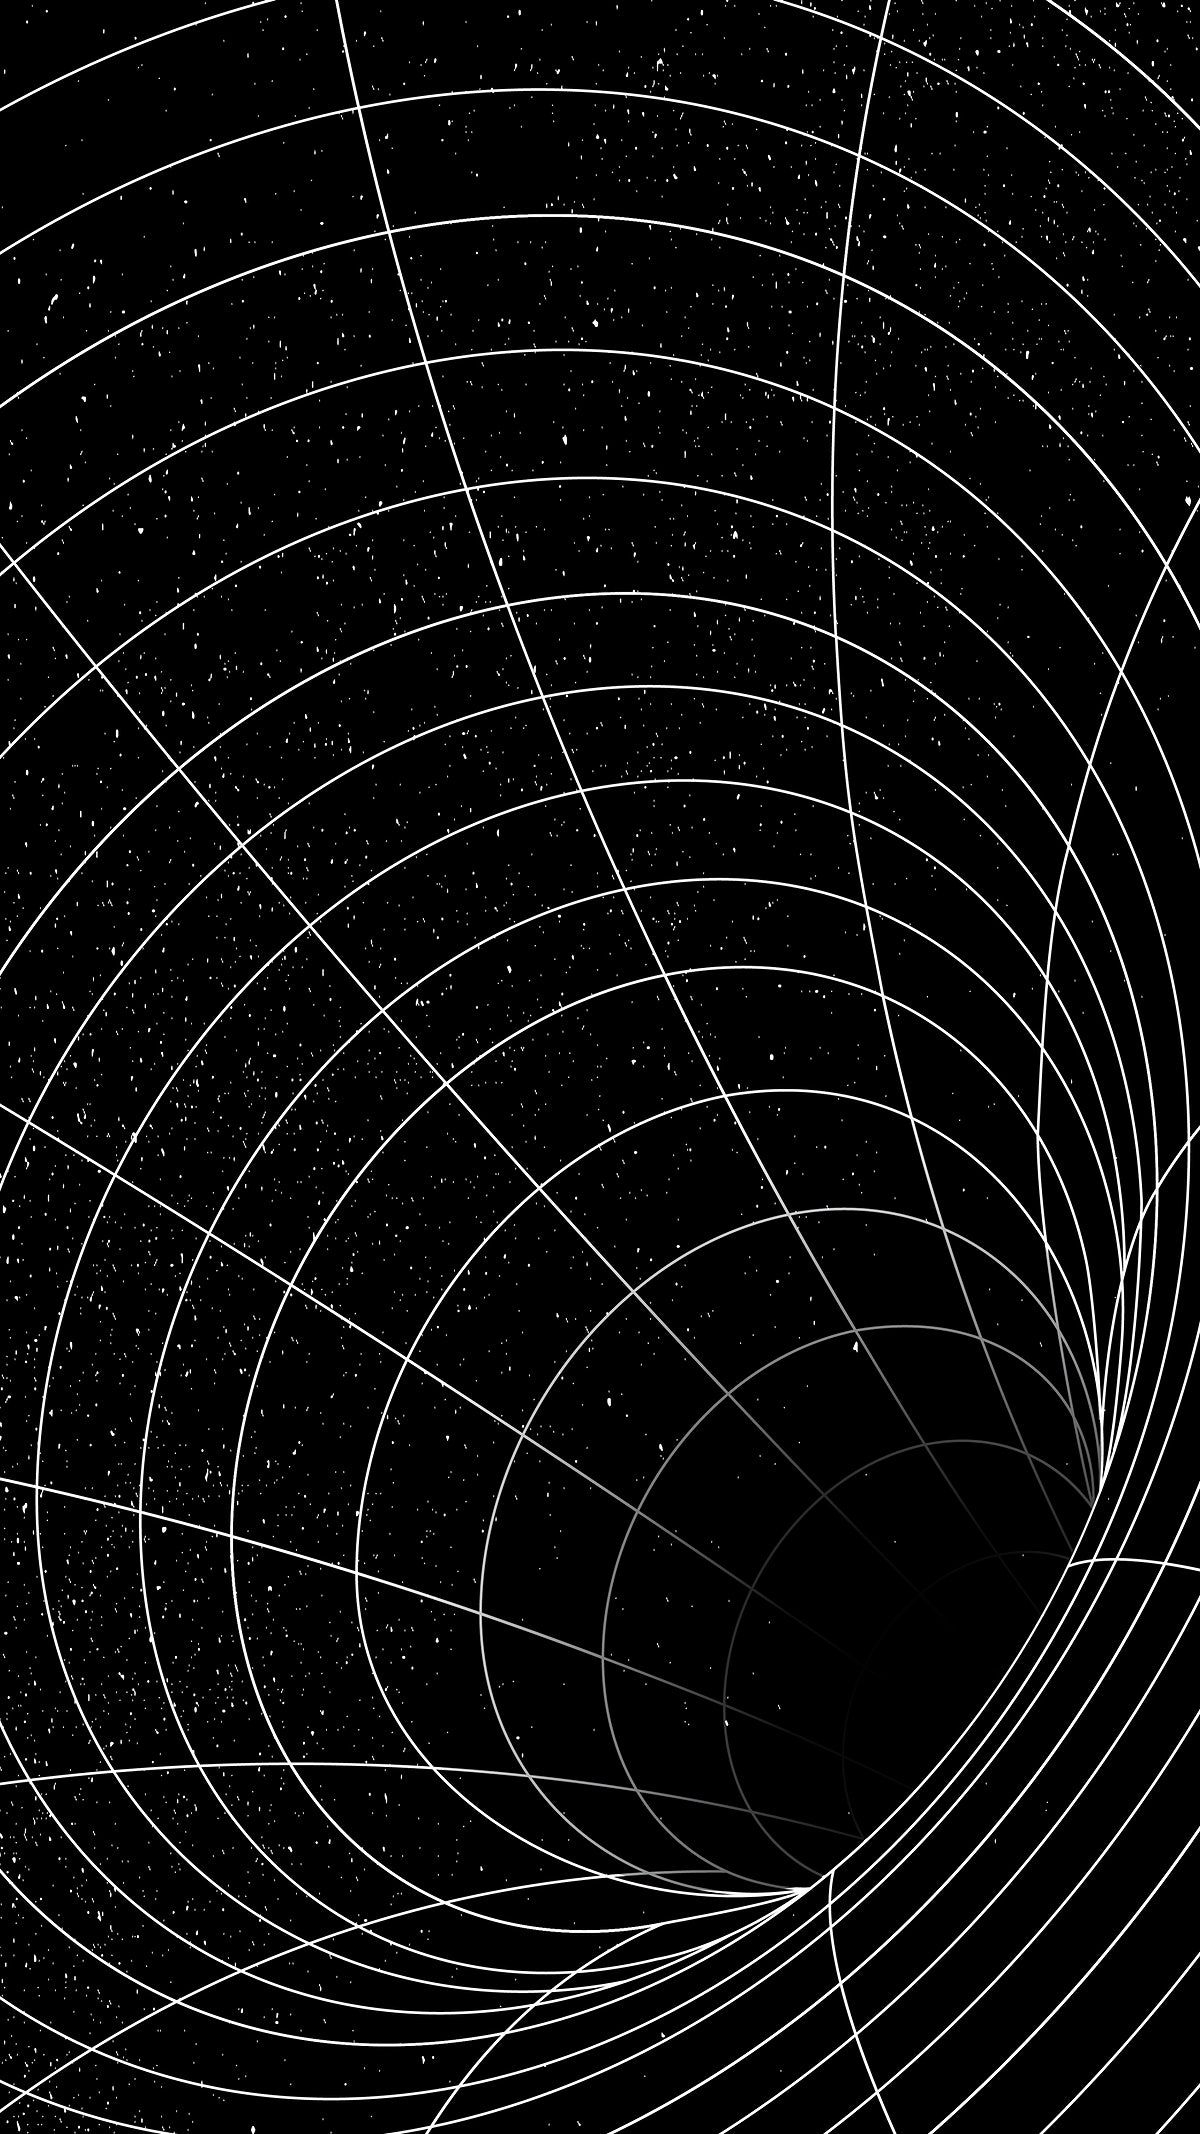 1200x2134 Download free vector of 3D Grid wormhole illusion design element vector by Aew about iphone wallpa&acirc;&#128;&brvbar; | Texture graphic design, Graphic design posters, Grid wallpaper